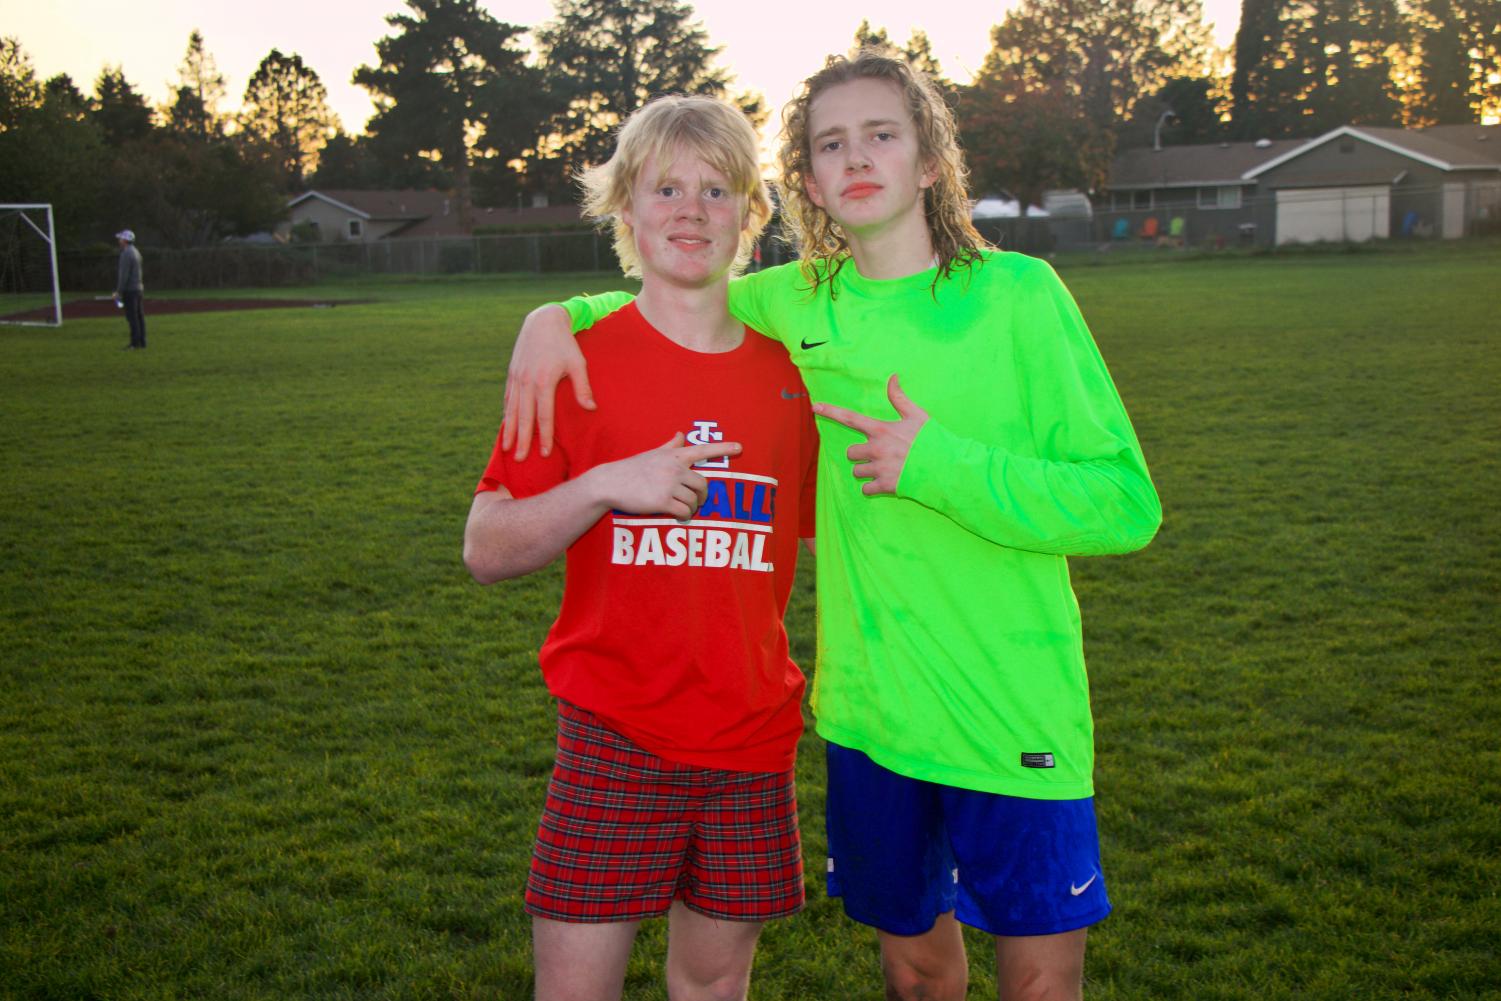 Junior+Ian+Simmons+Celebrates+Being+the+Only+Junior+on+the+JV2+Boys+Soccer+Team